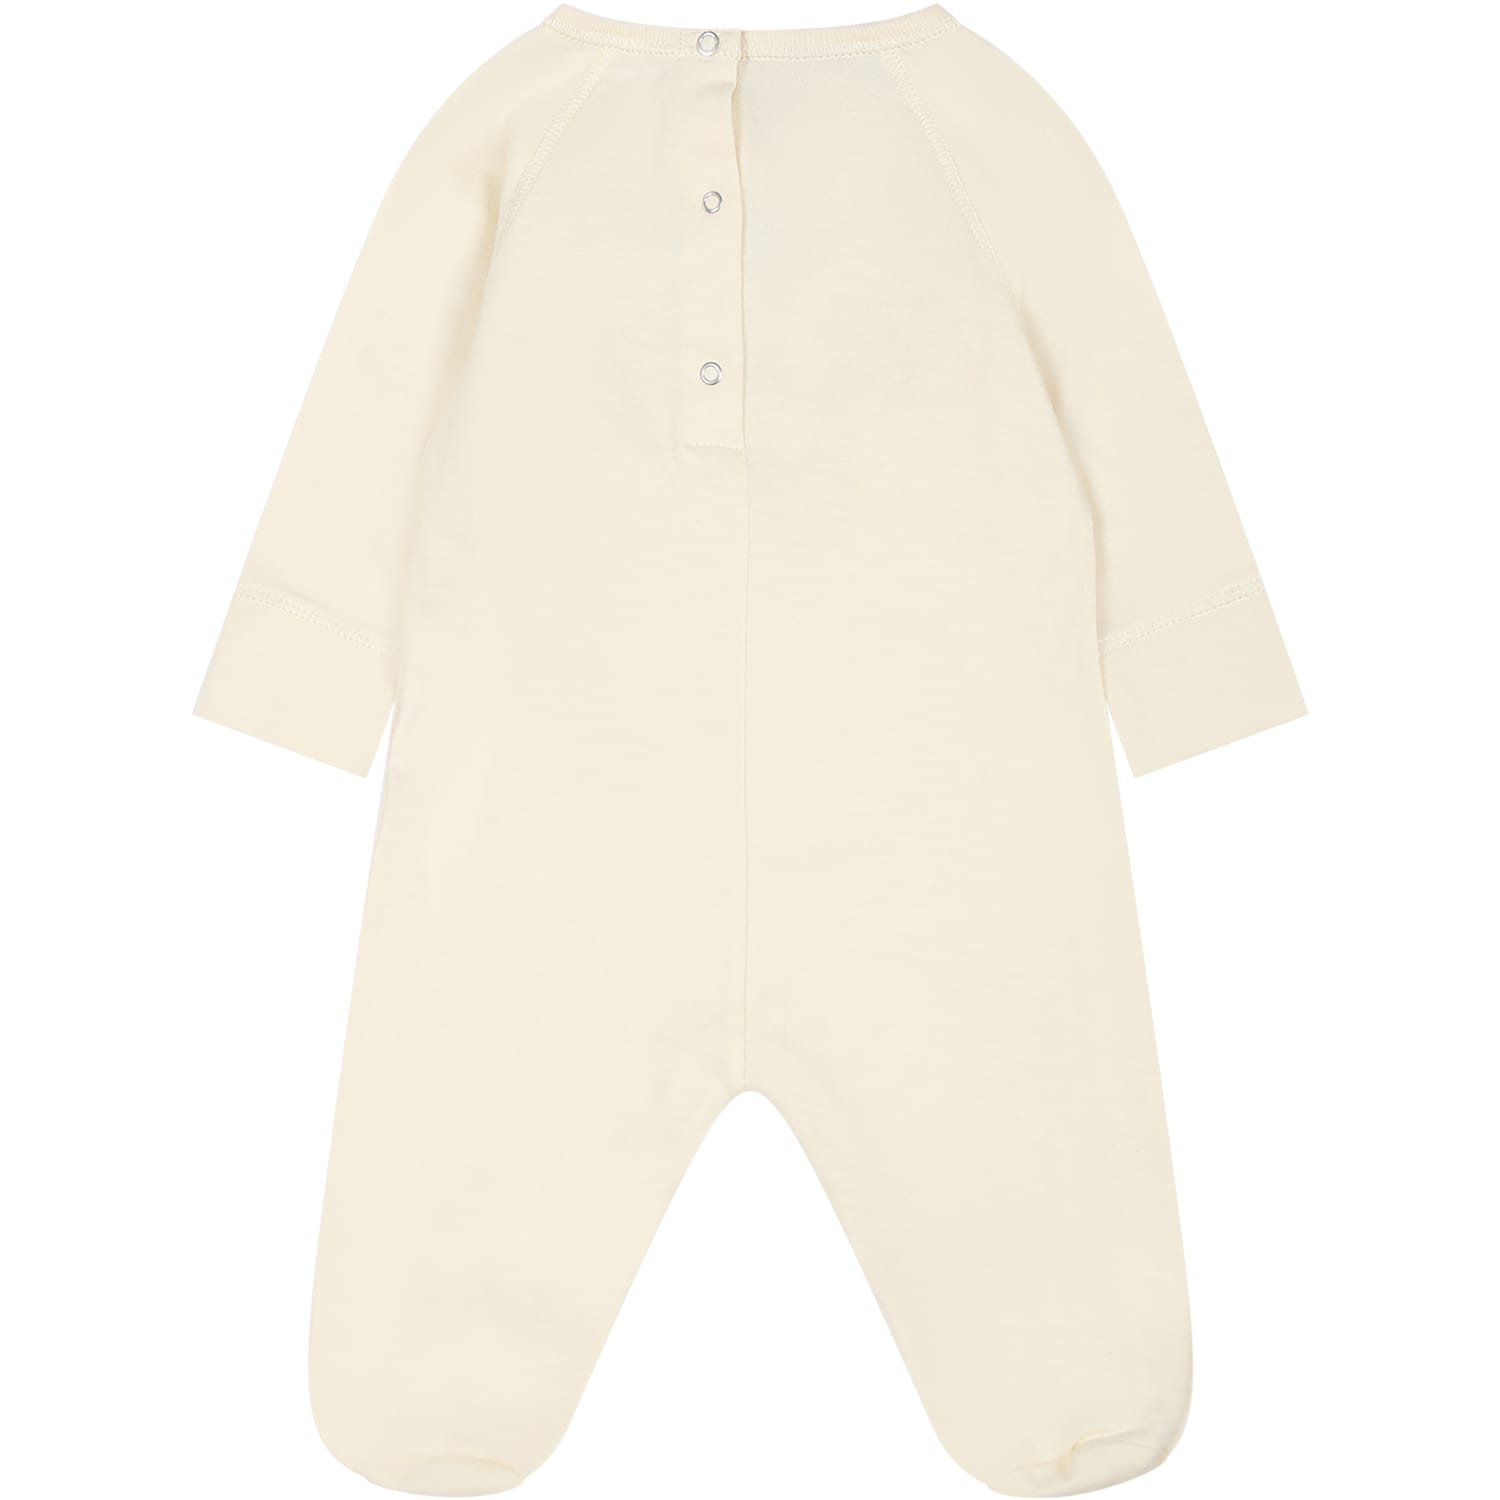 Shop Gucci Ivory Set For Baby Kids With Logo And Print